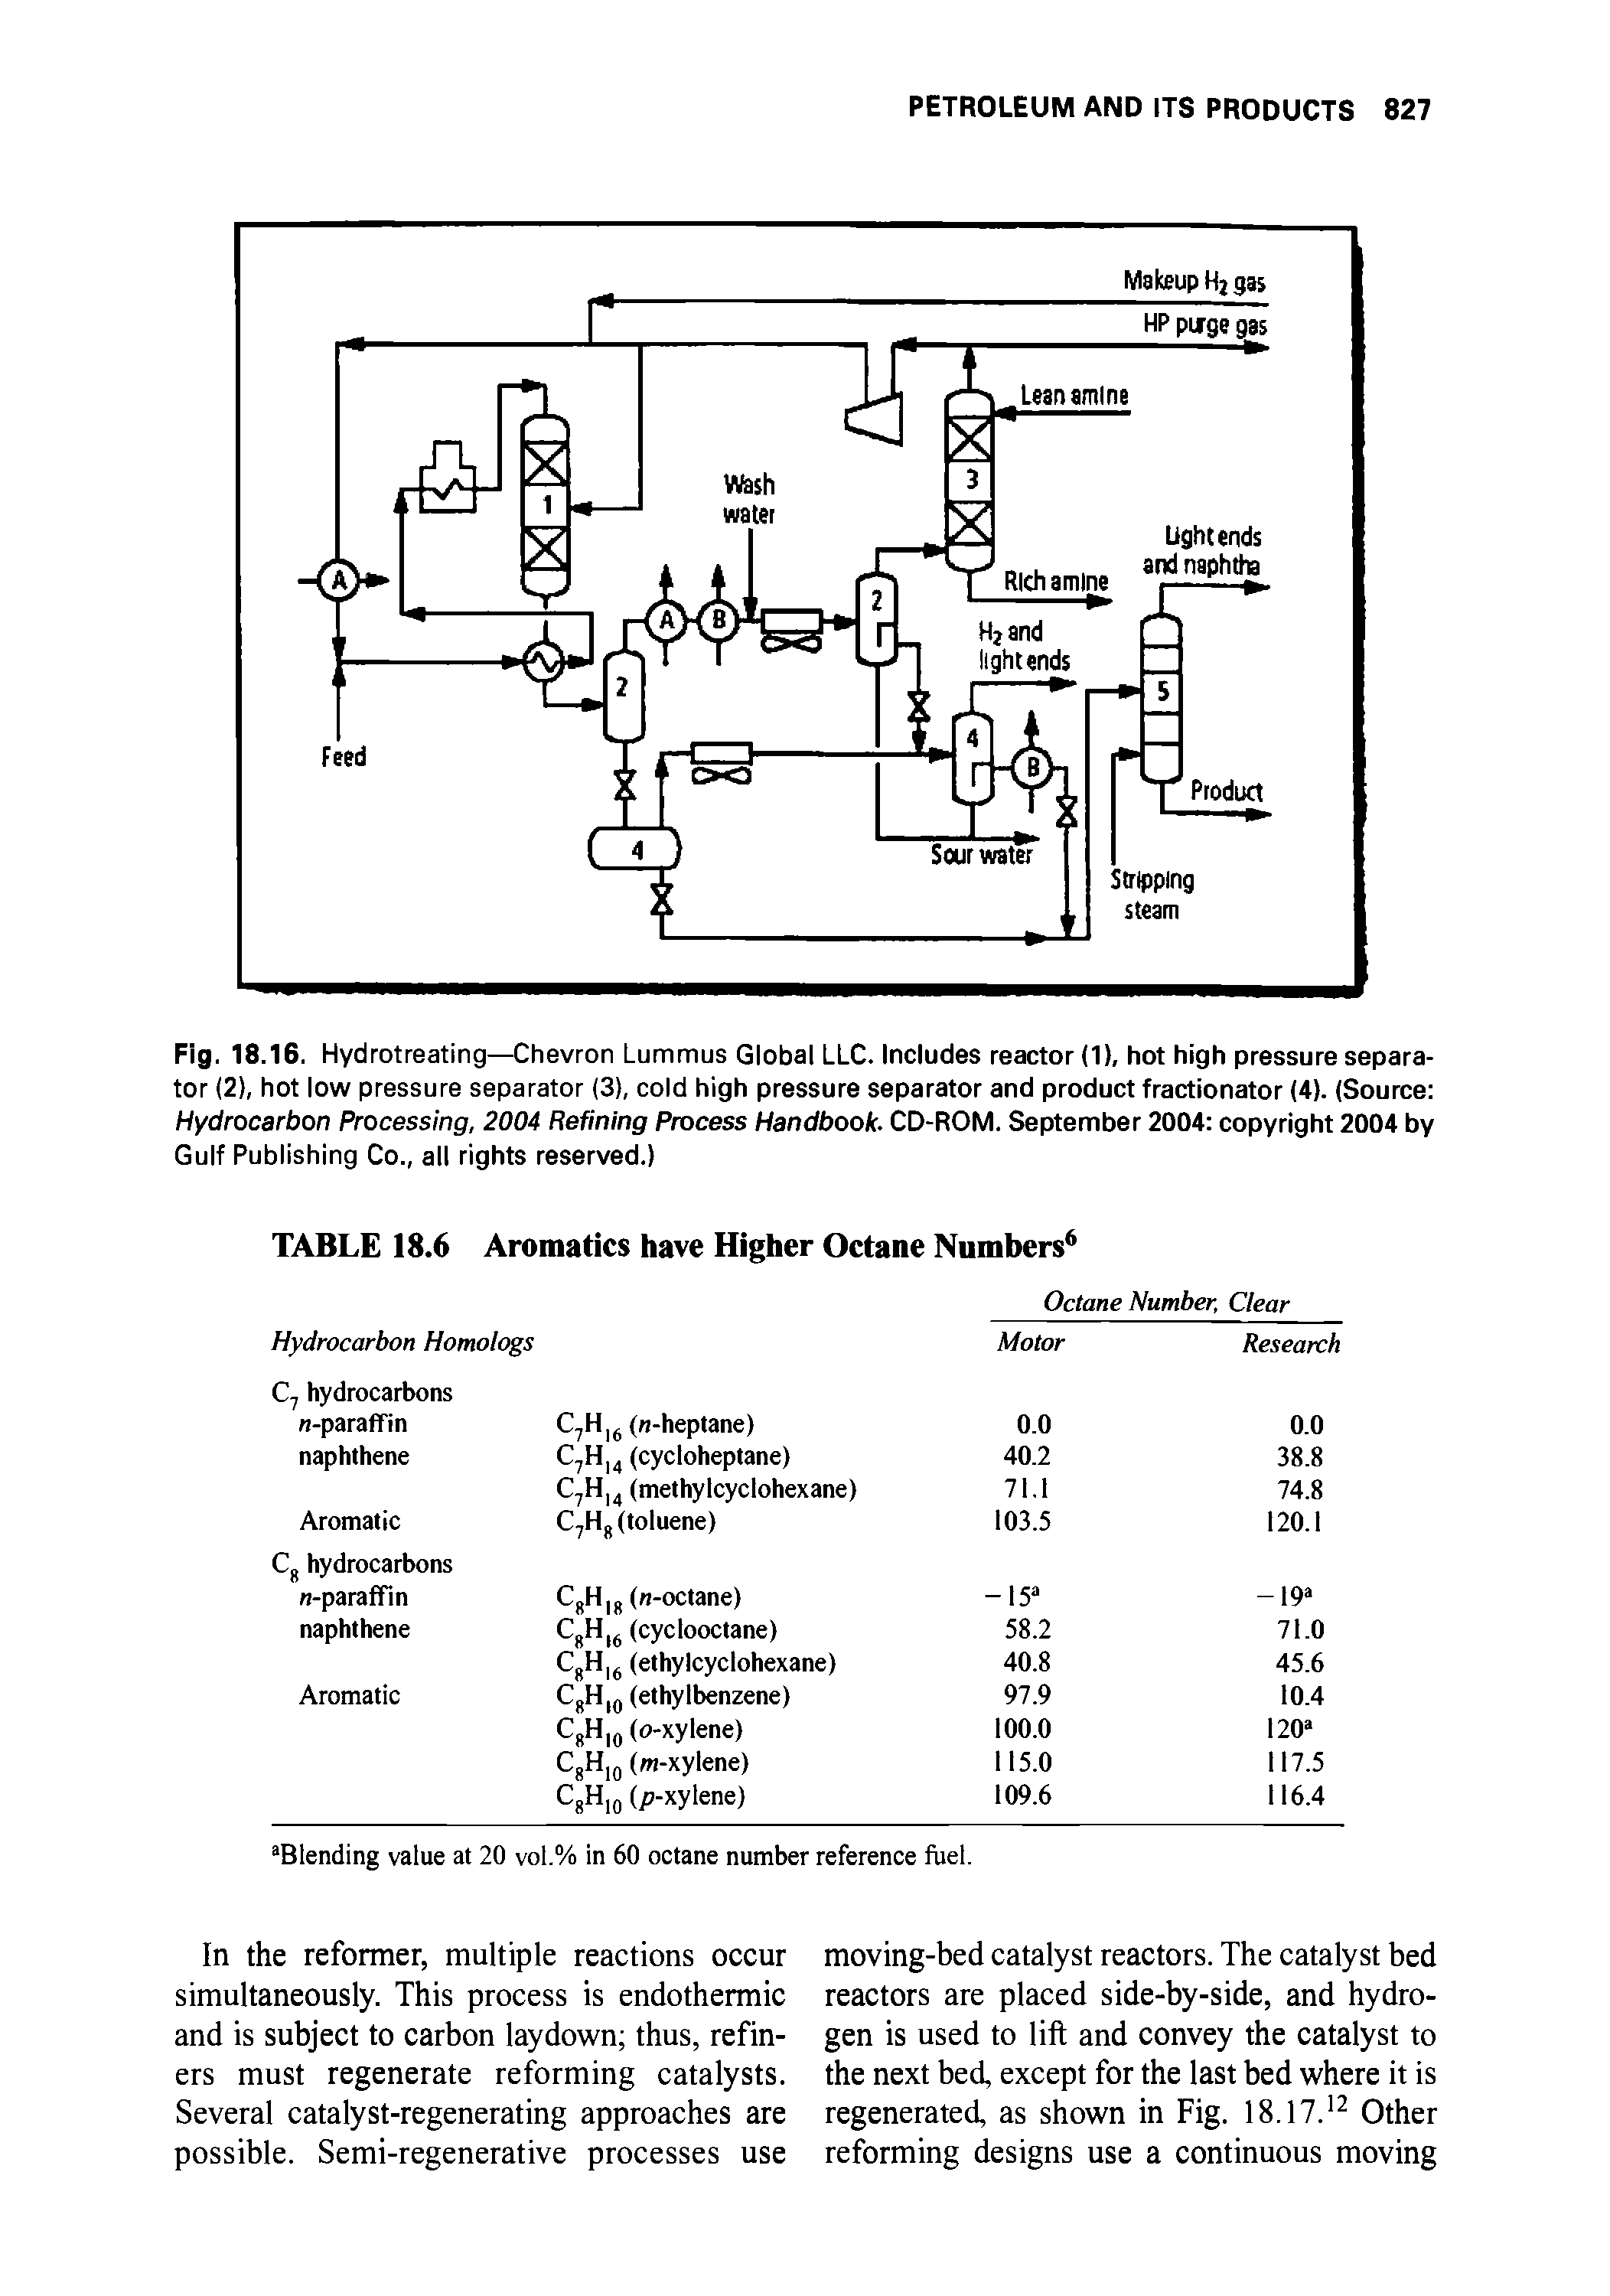 Fig. 18.16. Hydrotreating—Chevron Lummus Global LLC. Includes reactor (1), hot high pressure separator (2), hot low pressure separator (3), cold high pressure separator and product fractionator (4). (Source Hydrocarbon Processing, 2004 Refining Process Handbook. CD-ROM. September 2004 copyright 2004 by Gulf Publishing Co., all rights reserved.)...